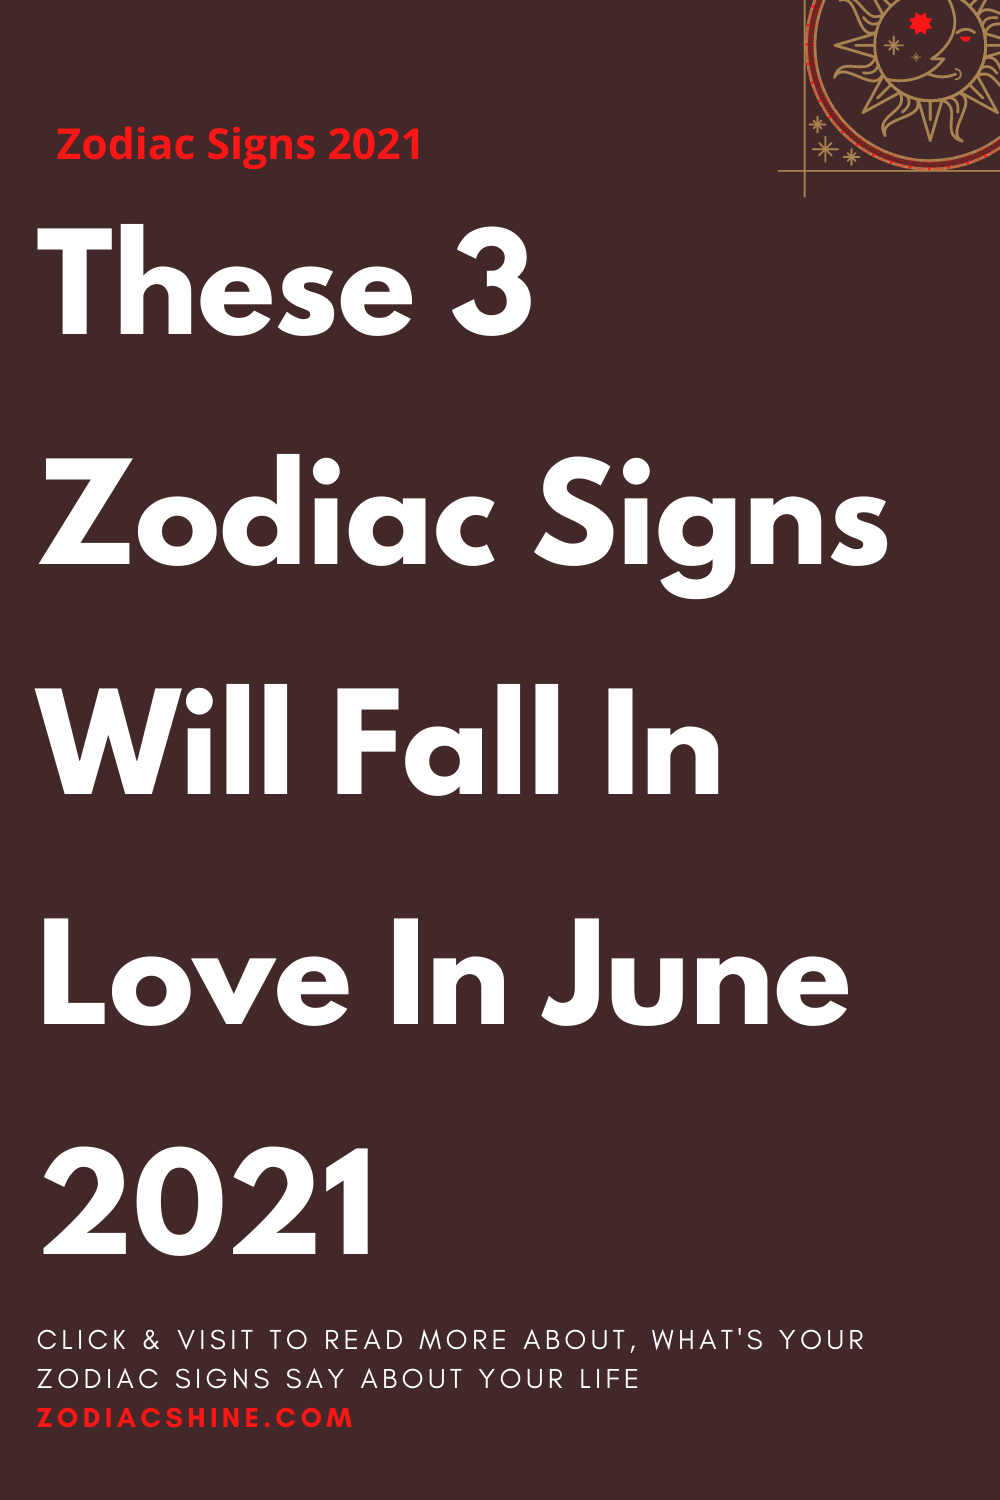 These 3 Zodiac Signs Will Fall In Love In June 2021